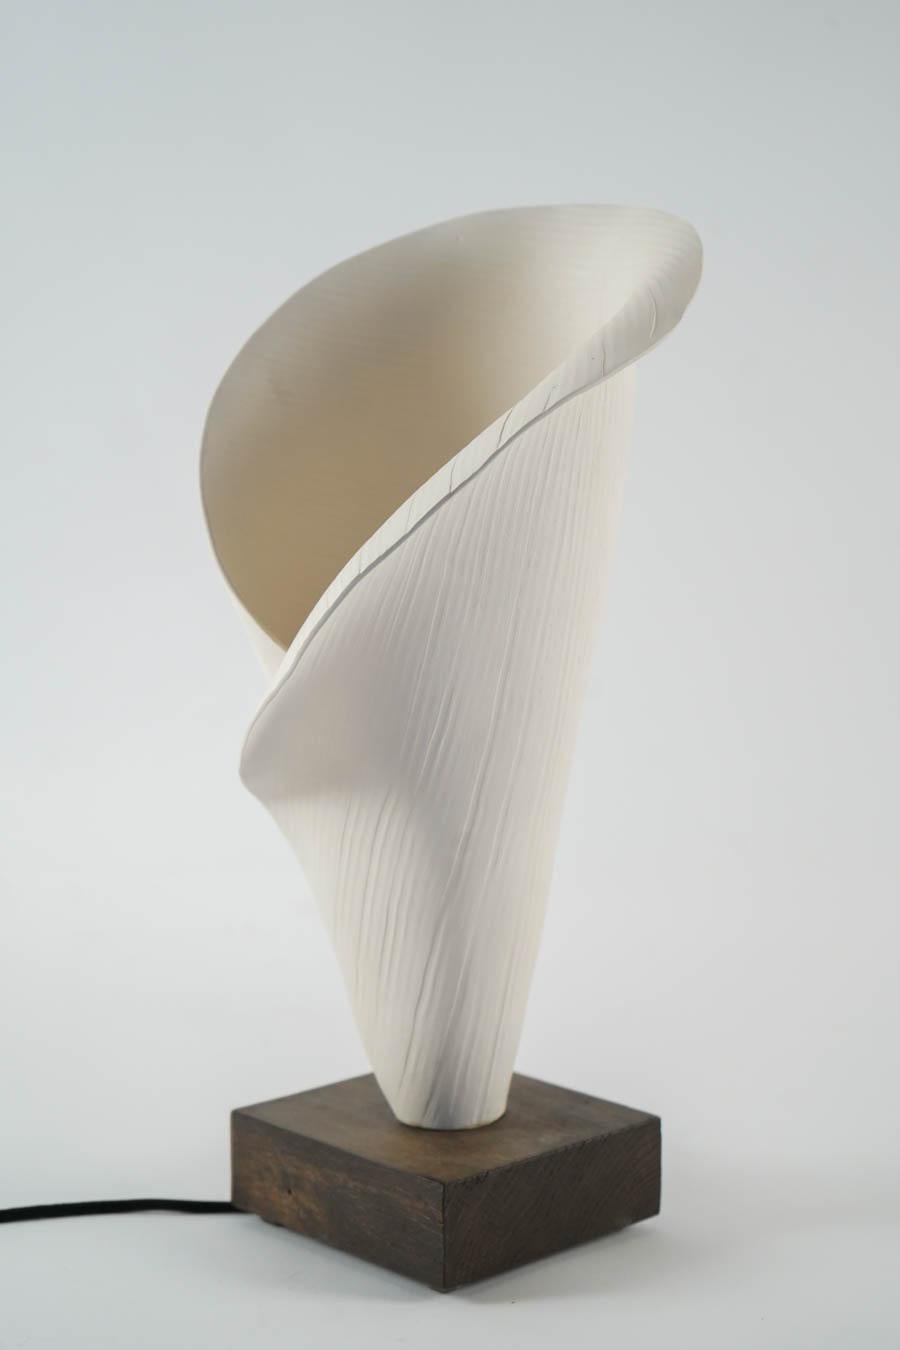 Table lamp, white ceramic lamp made by hand mounted on solid oak, art modern.